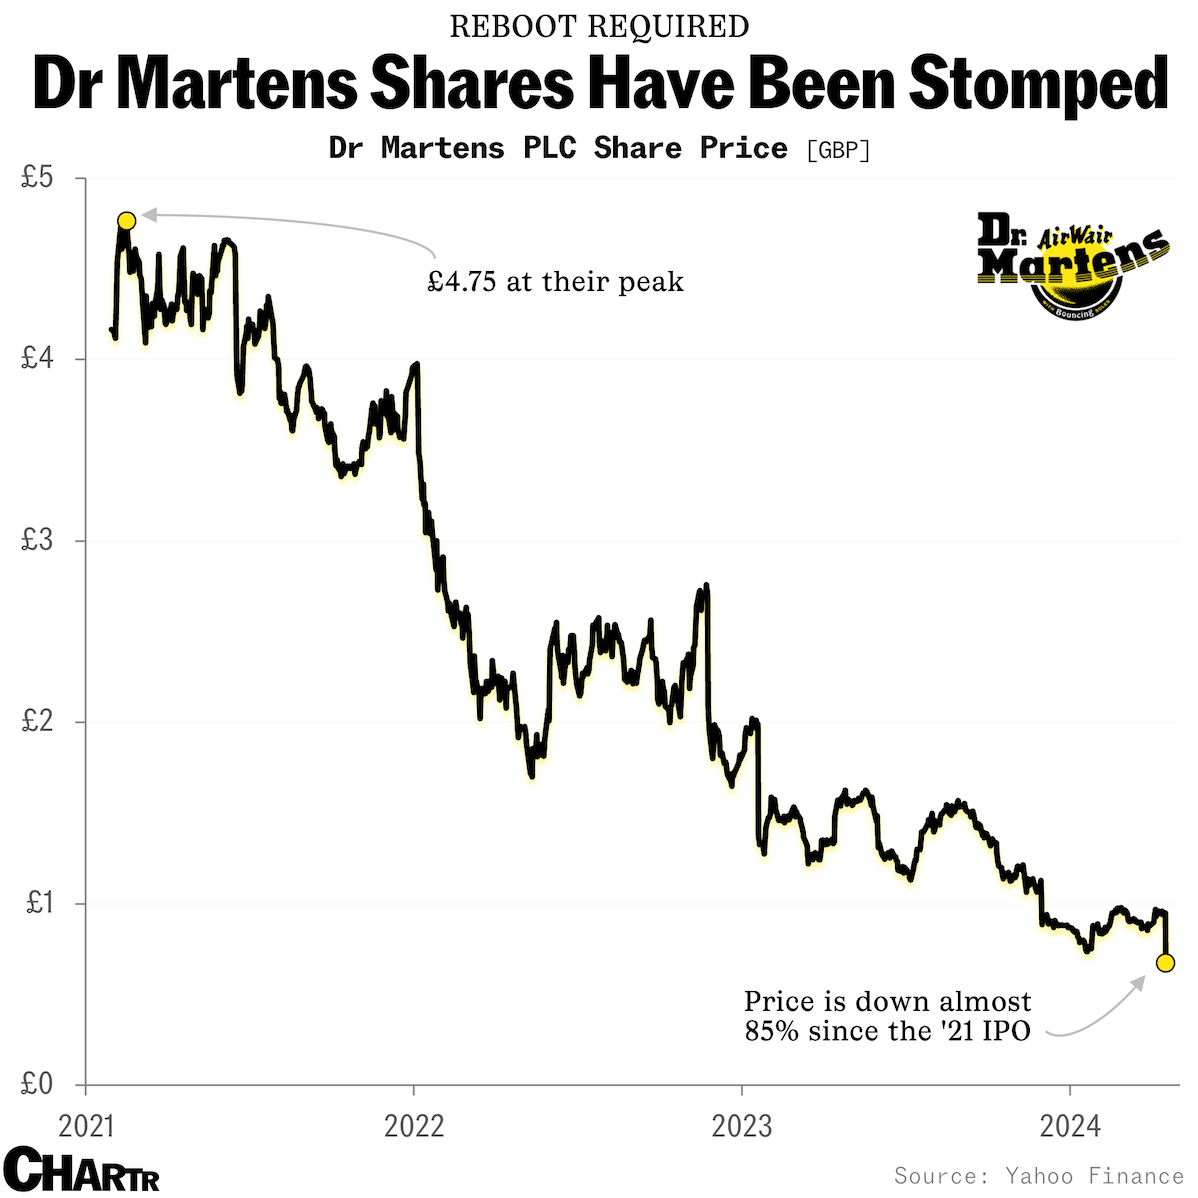 Dr Martens shares have been stomped